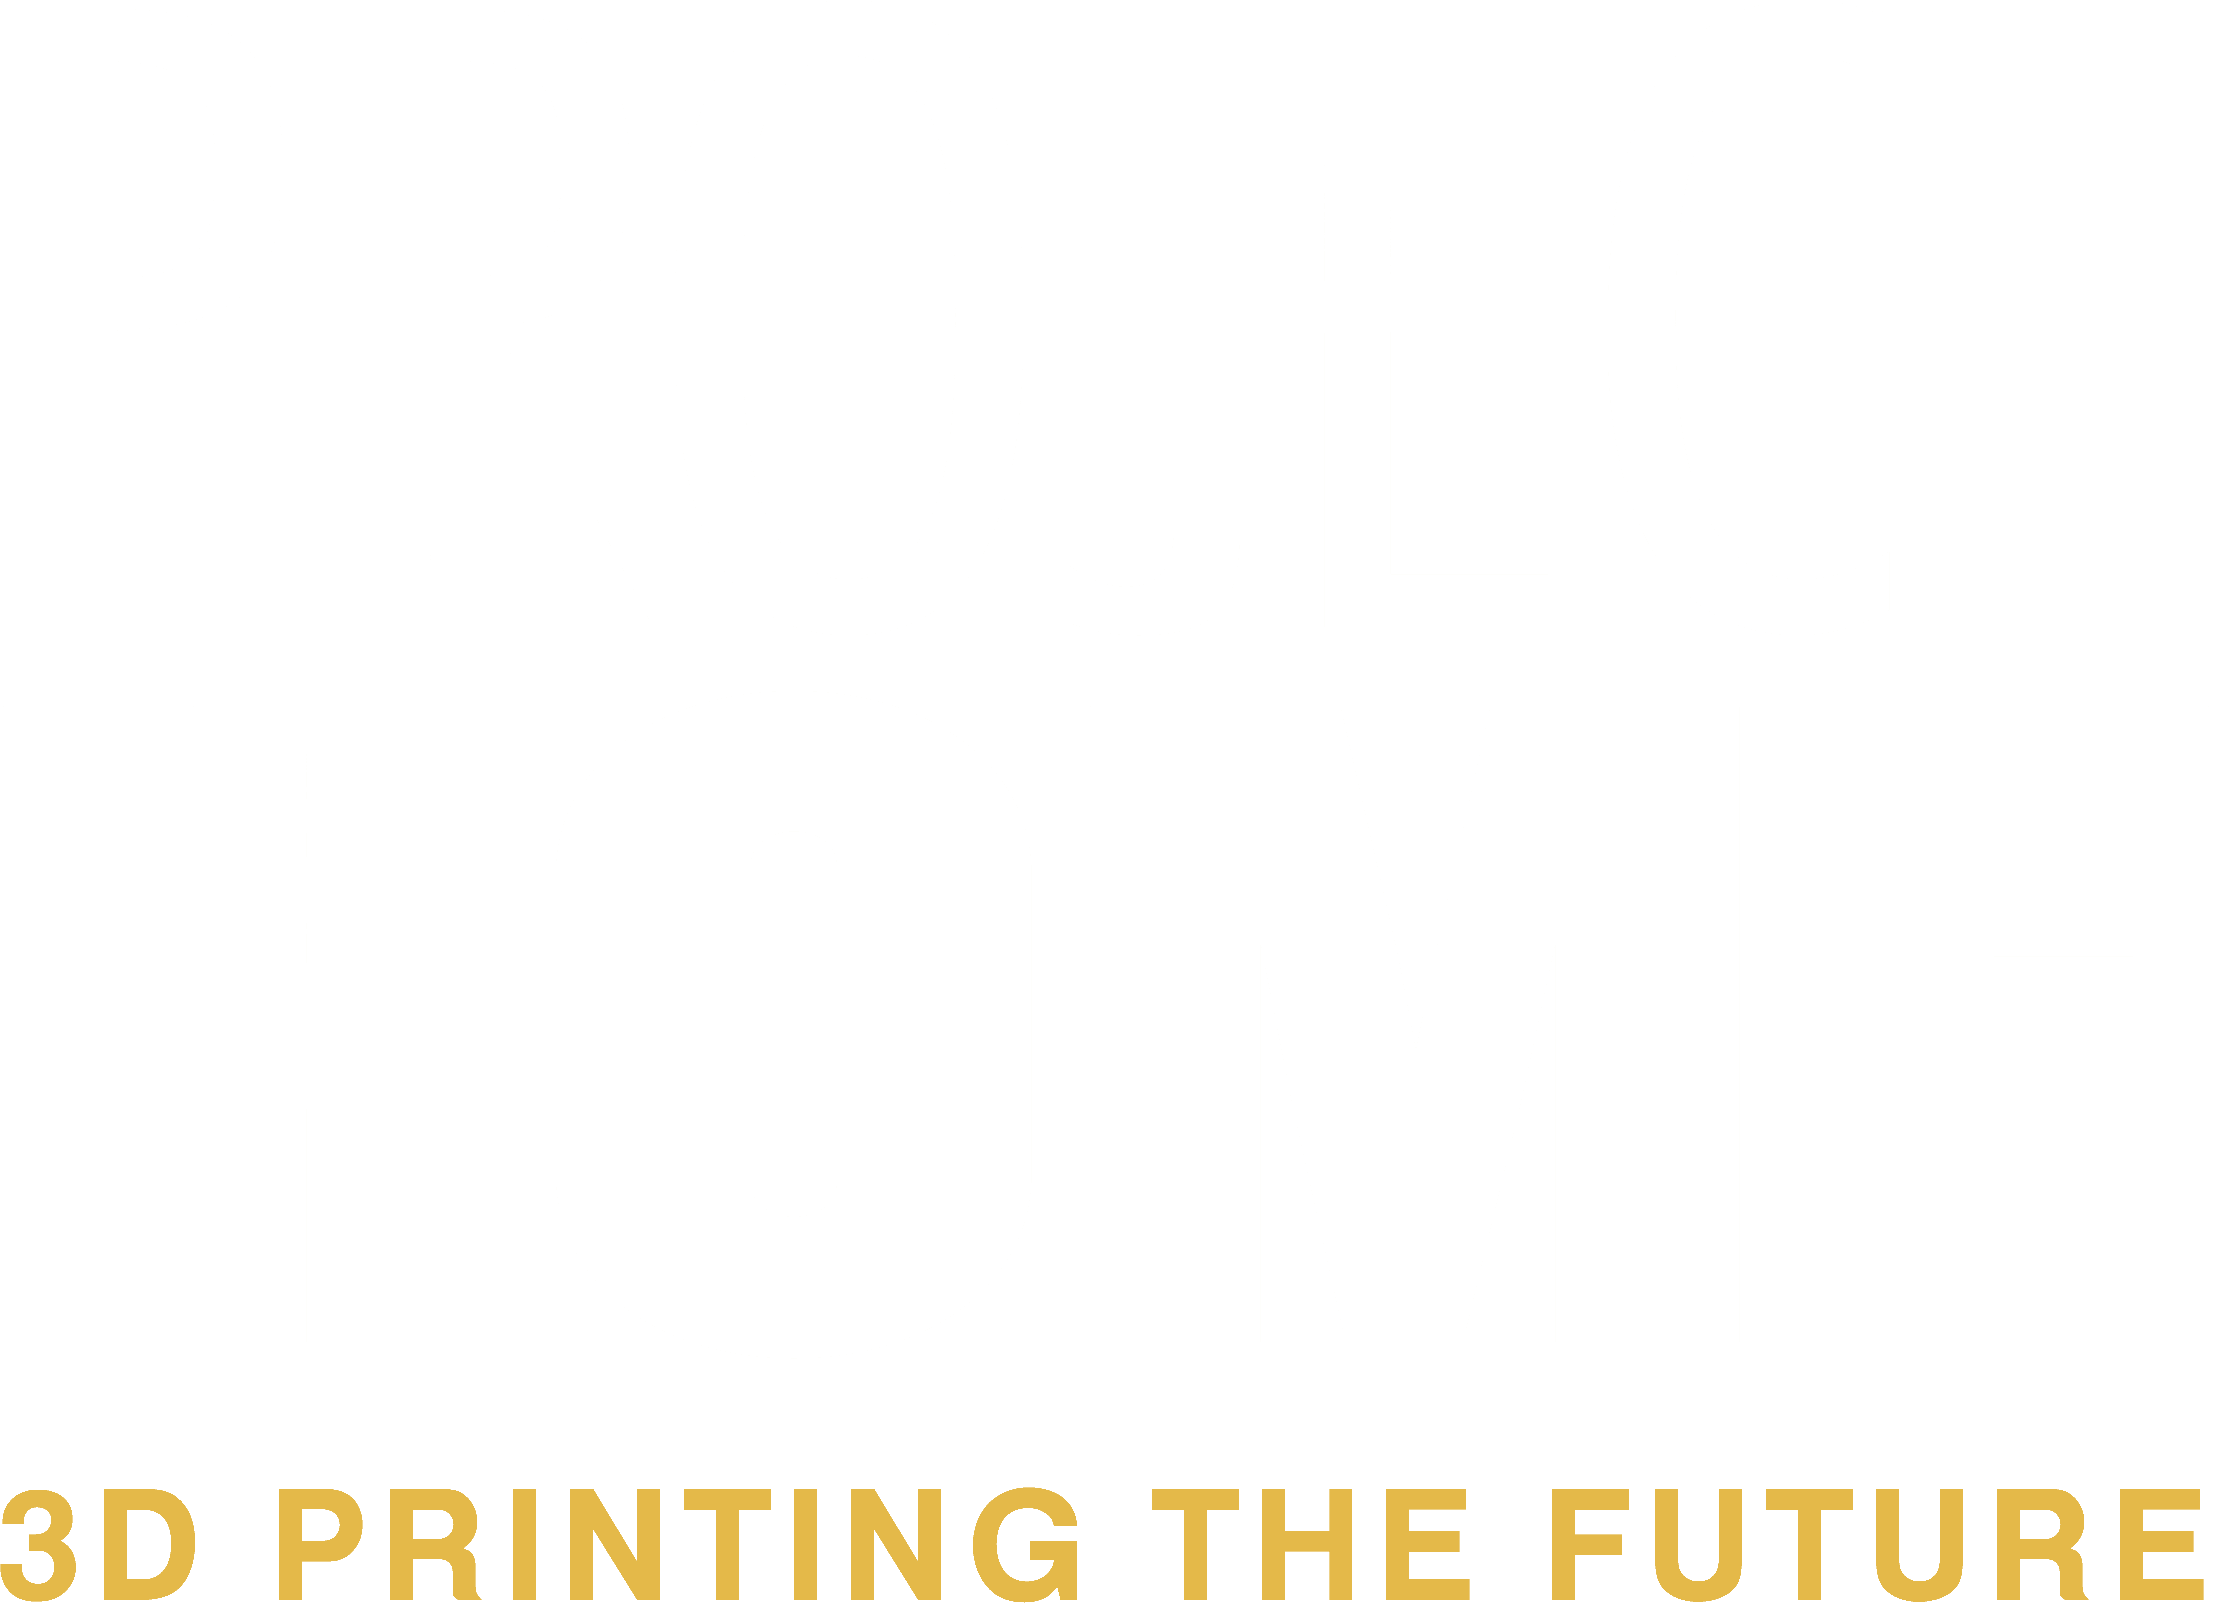 Project Home logo